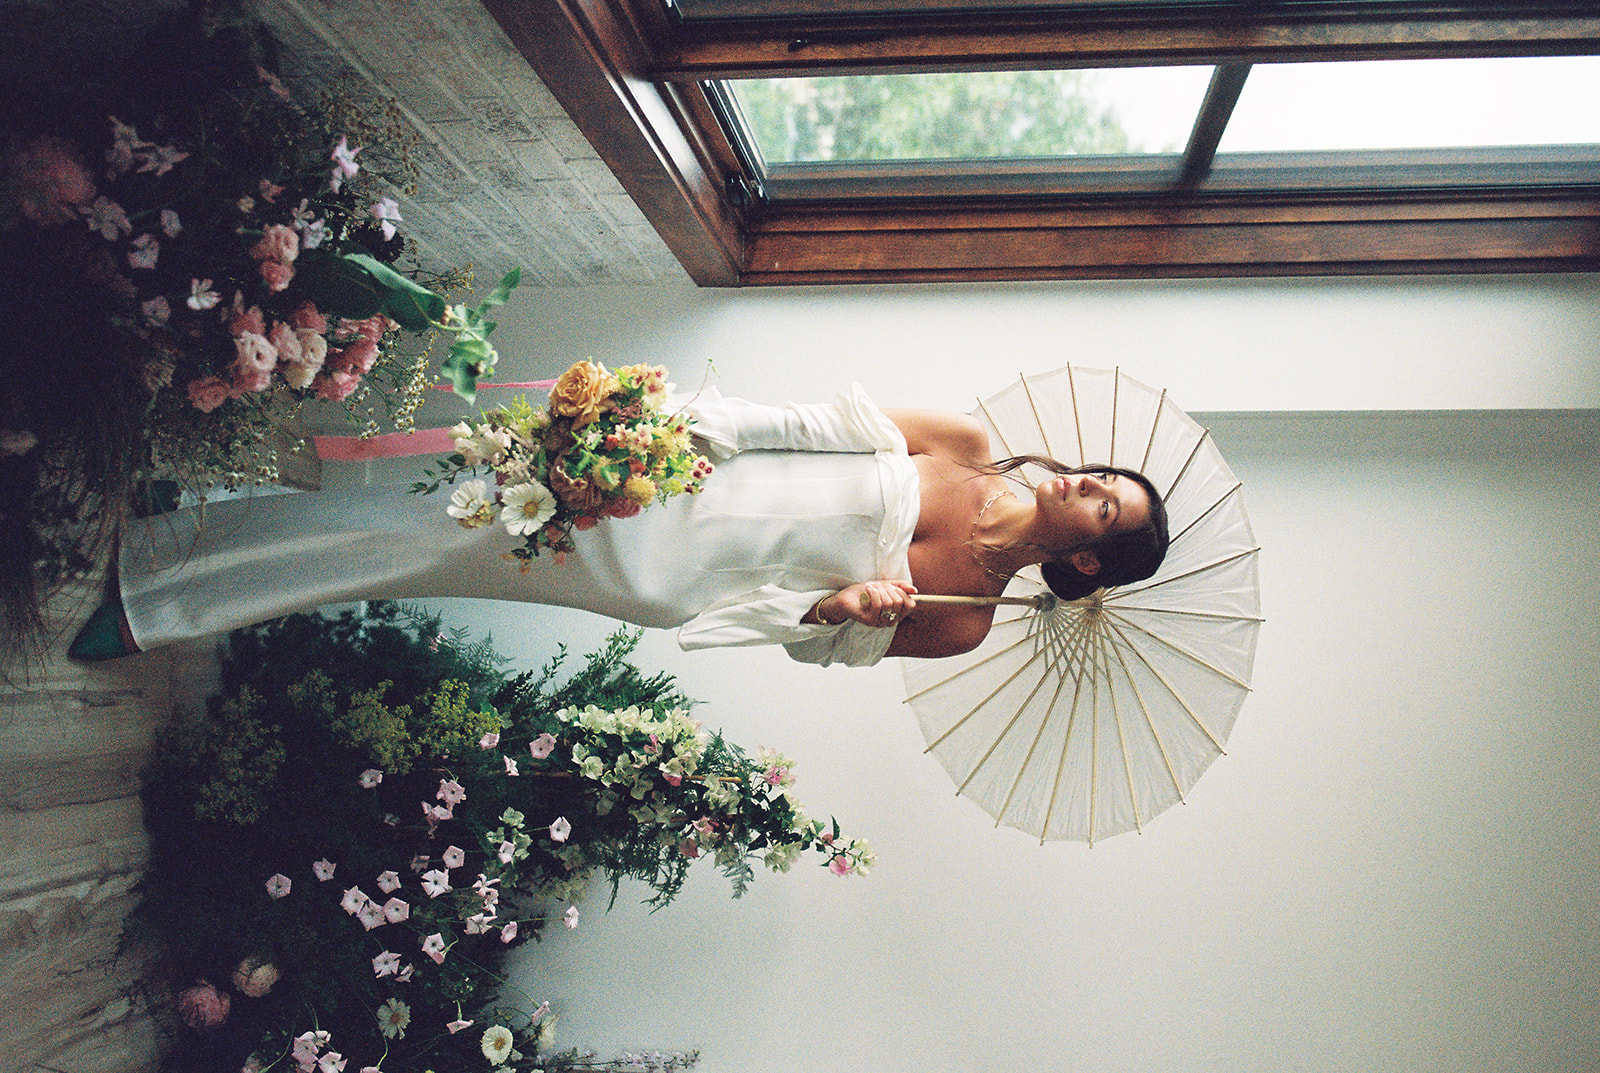 An elegant bride in an off-the-shoulder wedding dress holding a white paper parasol and bright floral bridal bouquet.  